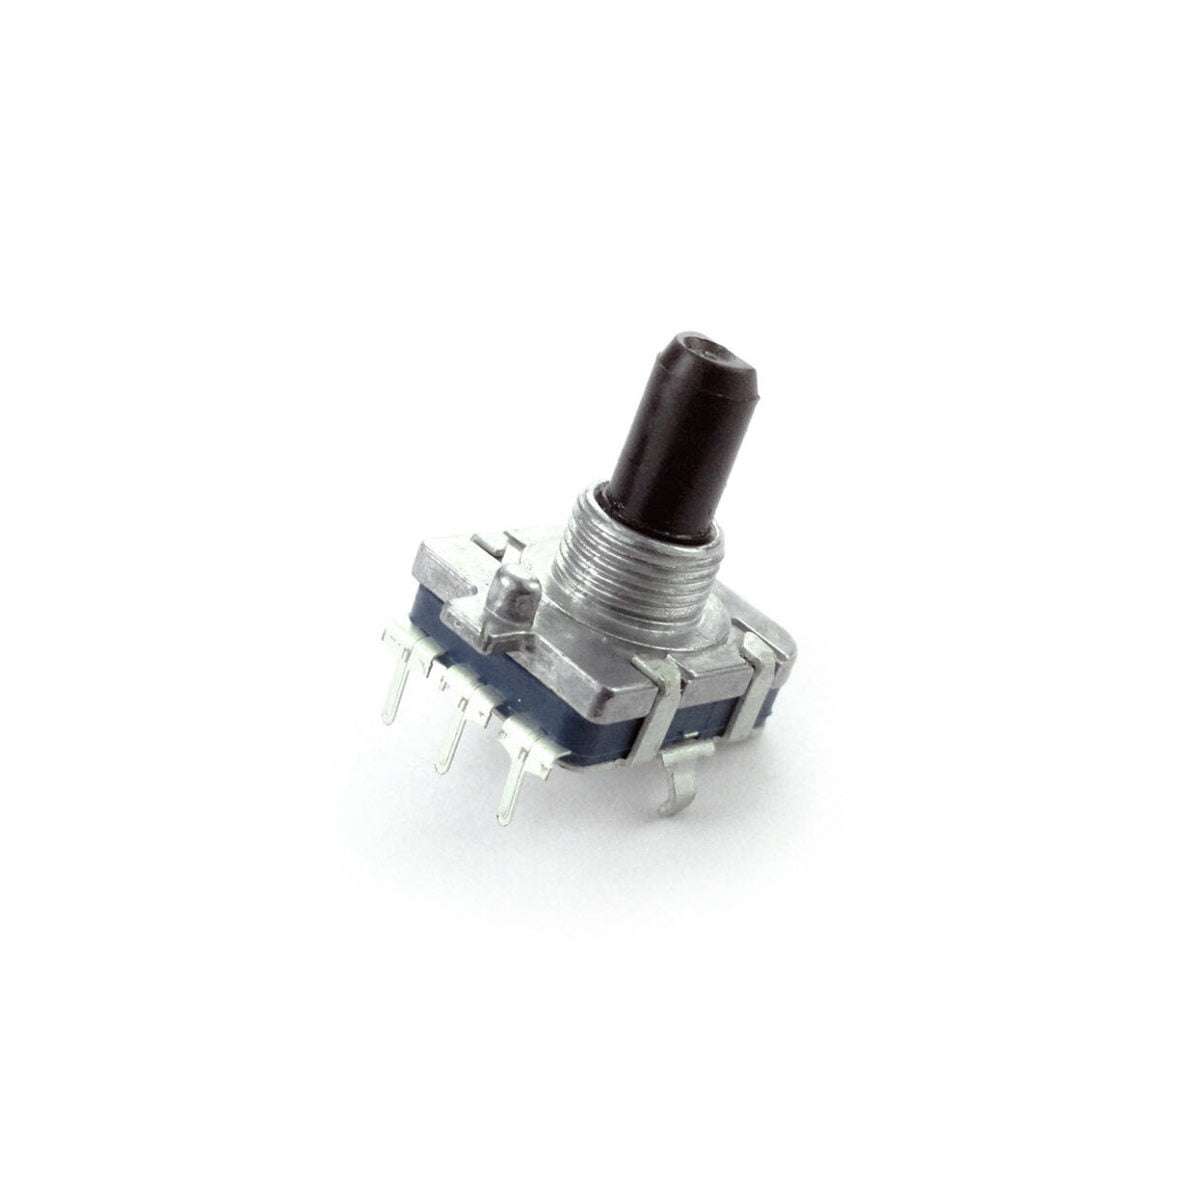 Roland MV-8800 Replacement Encoder on a white background